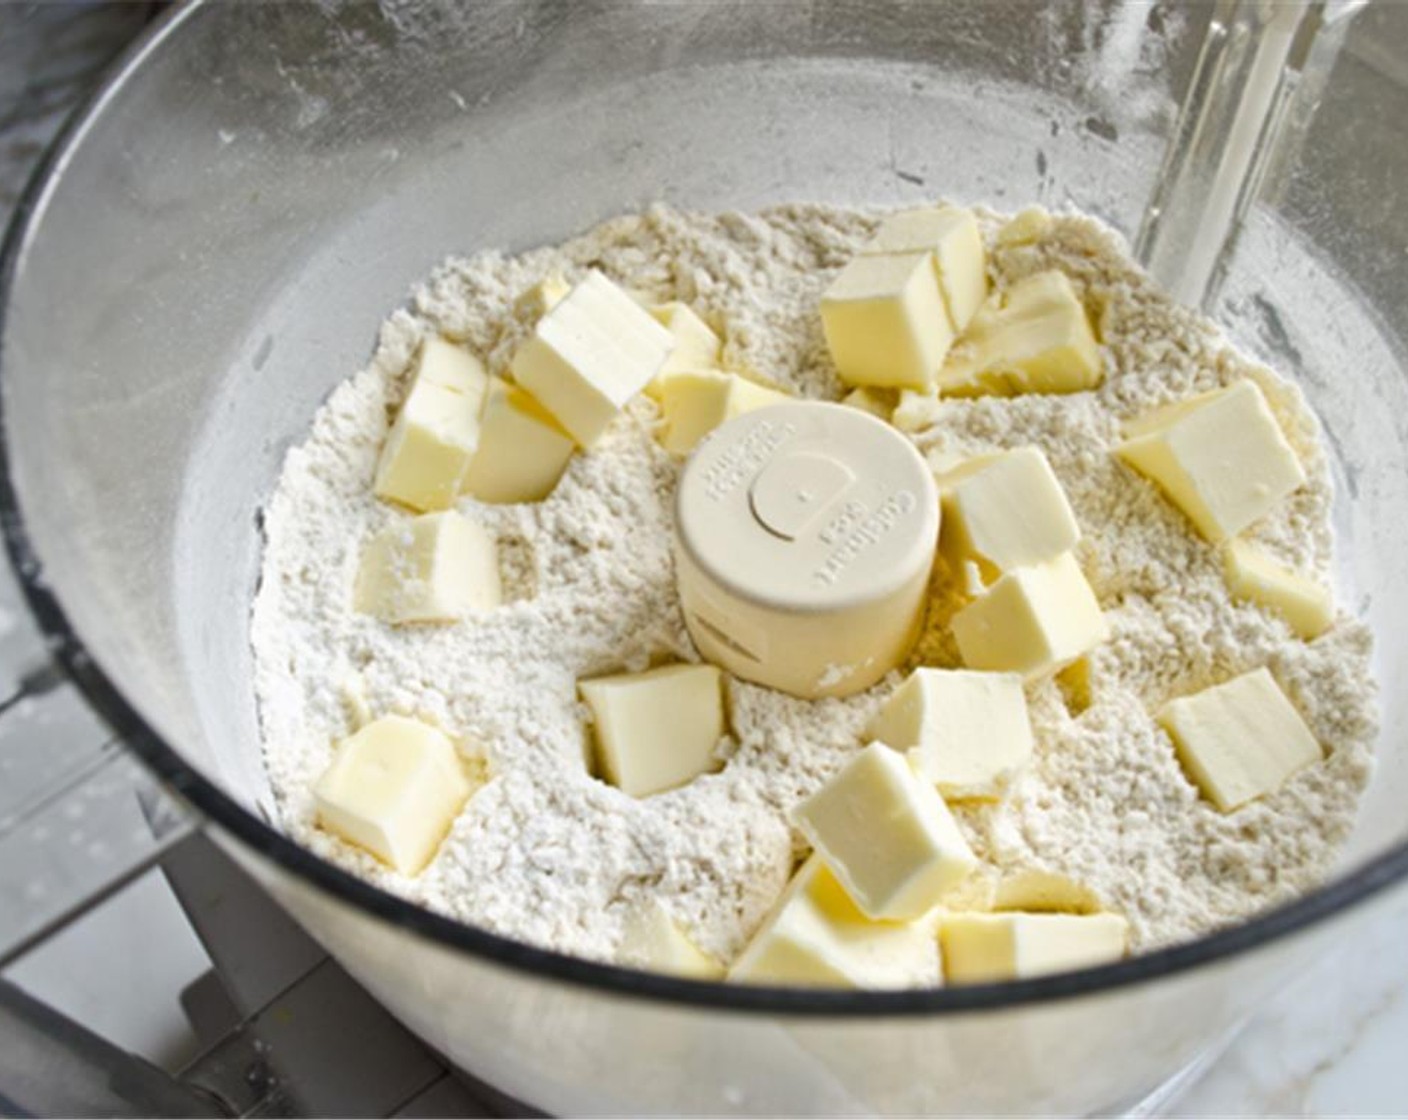 step 3 Add the Unsalted Butter (1/2 cup) and pulse until the mixture resembles coarse curd. Add the Philadelphia Original Soft Cheese (2 Tbsp) and pulse a few times until incorporated with a few pea-sized pieces of cream cheese intact. Transfer mixture to a mixing bowl.